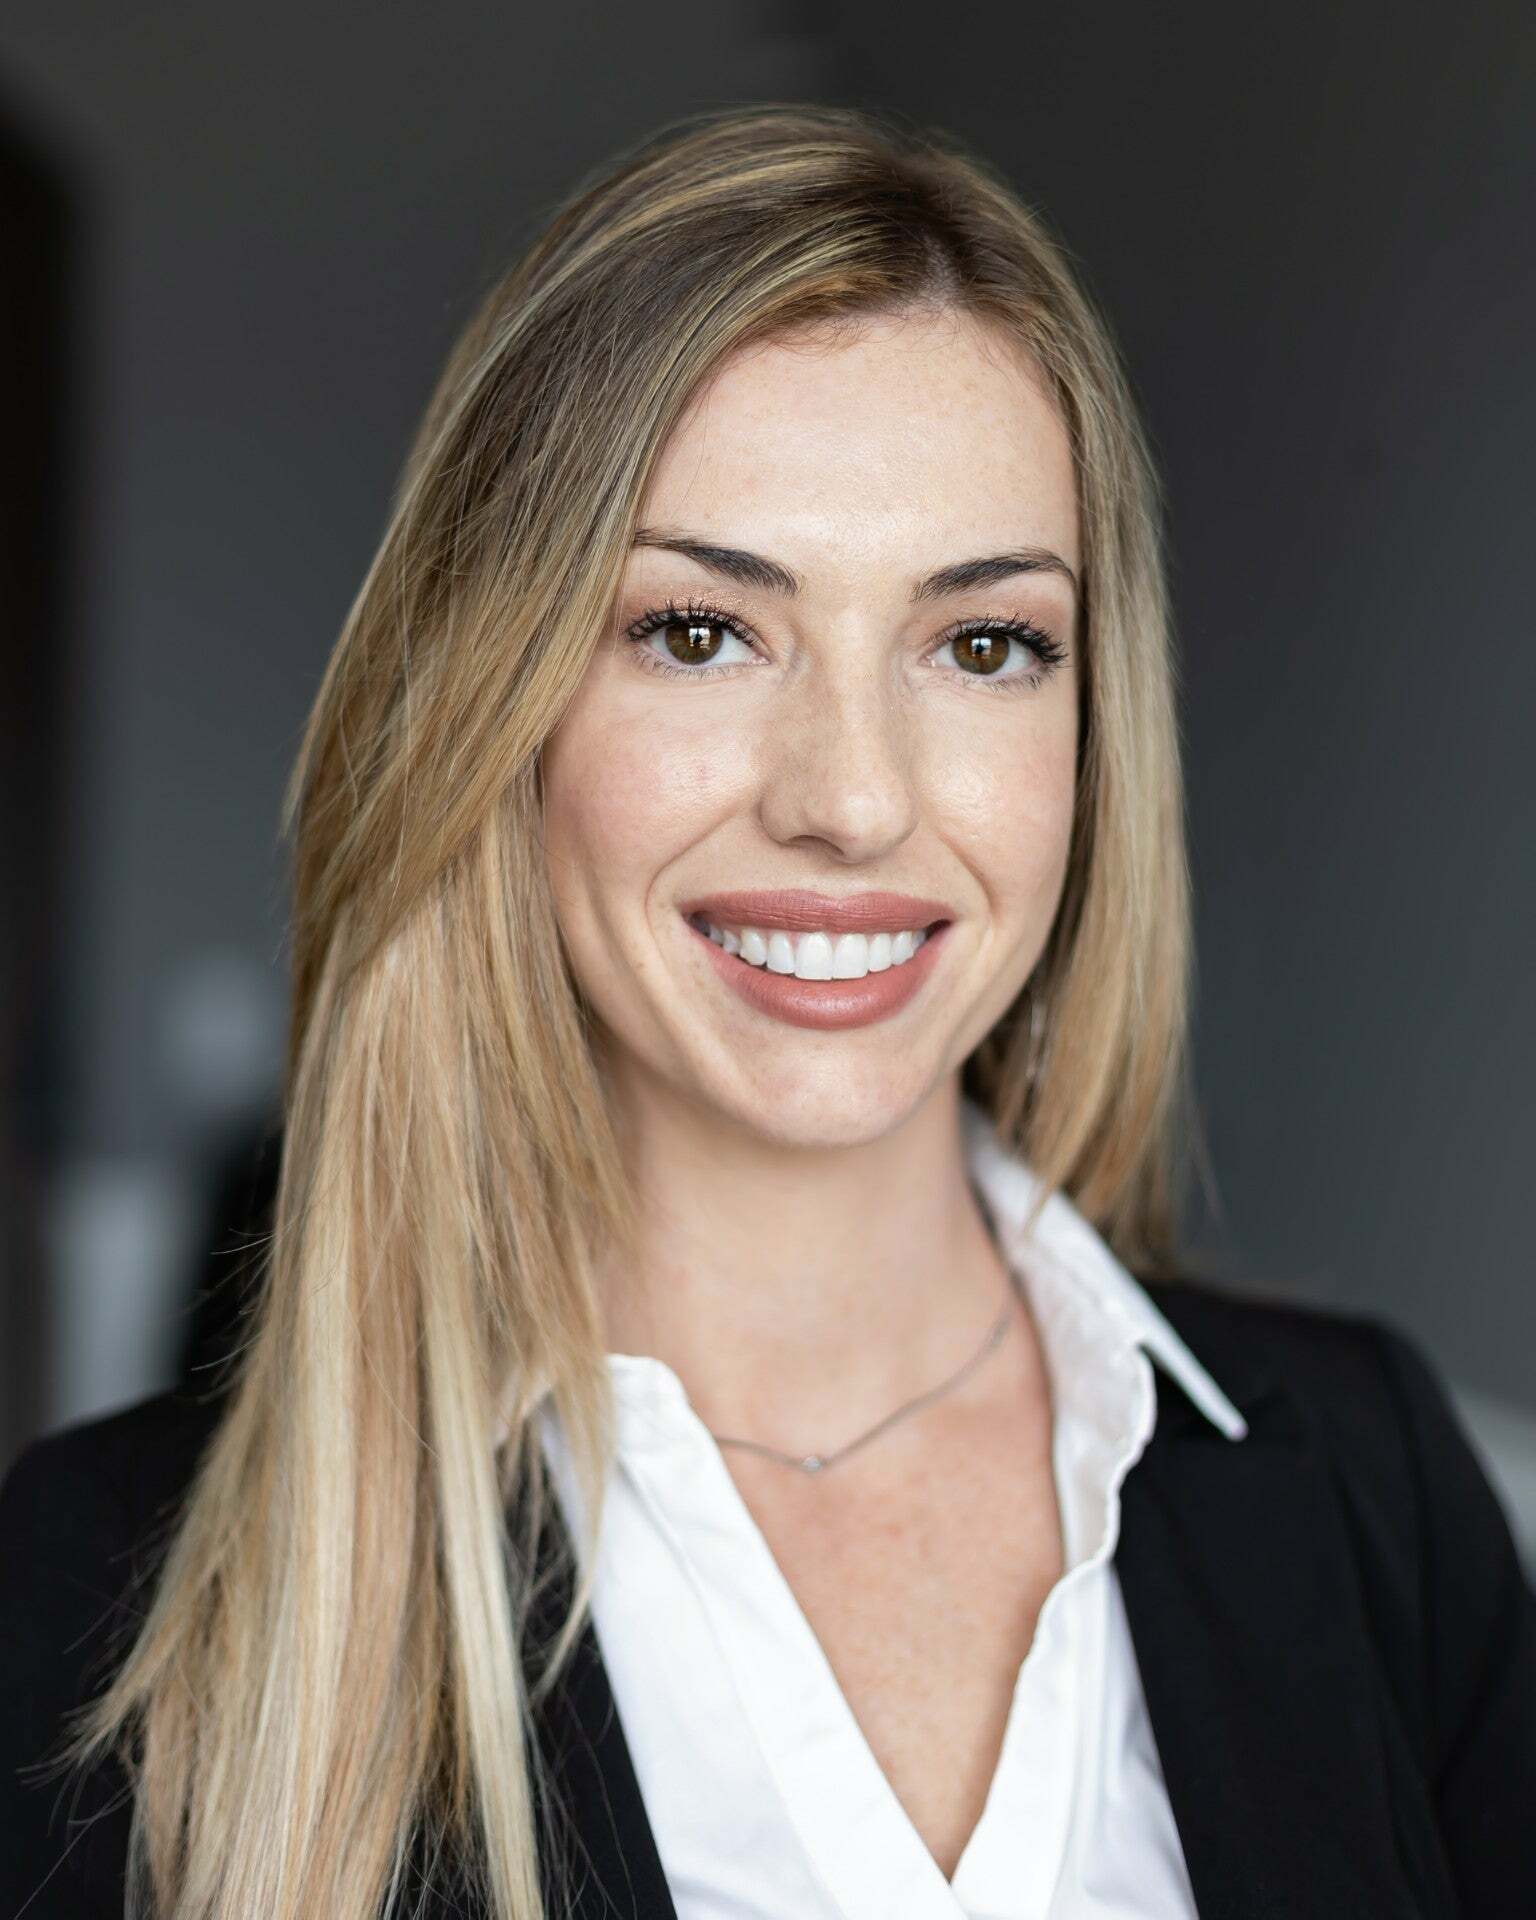 Jenna Palmieri-Rosiu, Real Estate Salesperson in Rocky River, ERA Real Solutions Realty